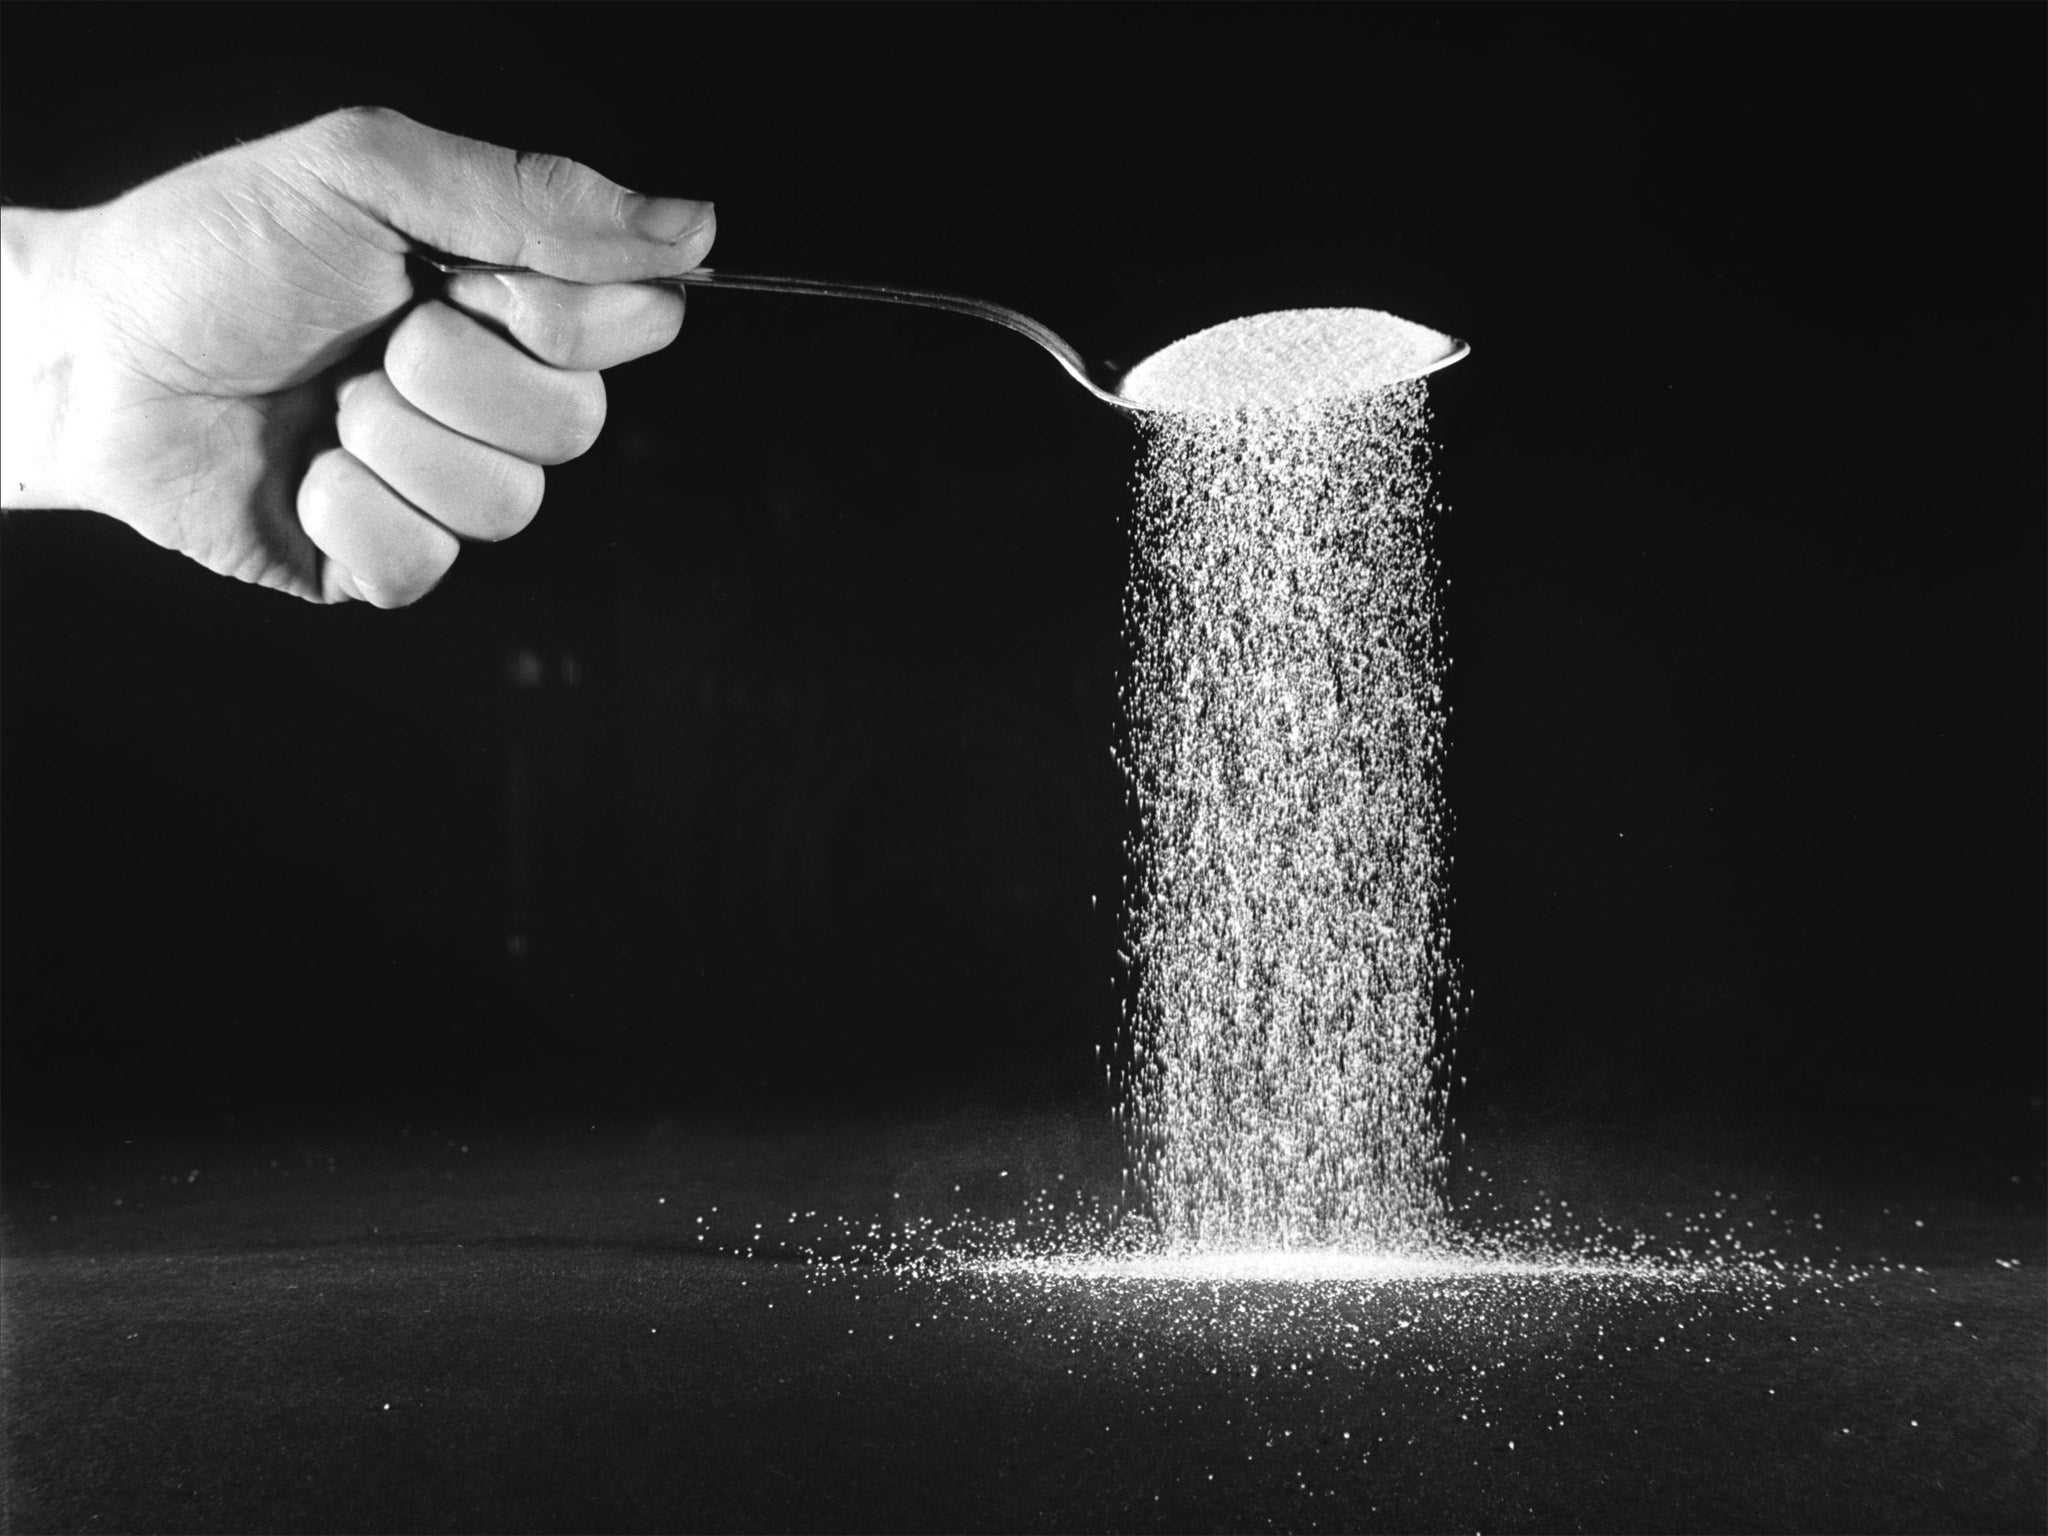 Refined sugar is as harmful as tobacco, say Action Against Sugar